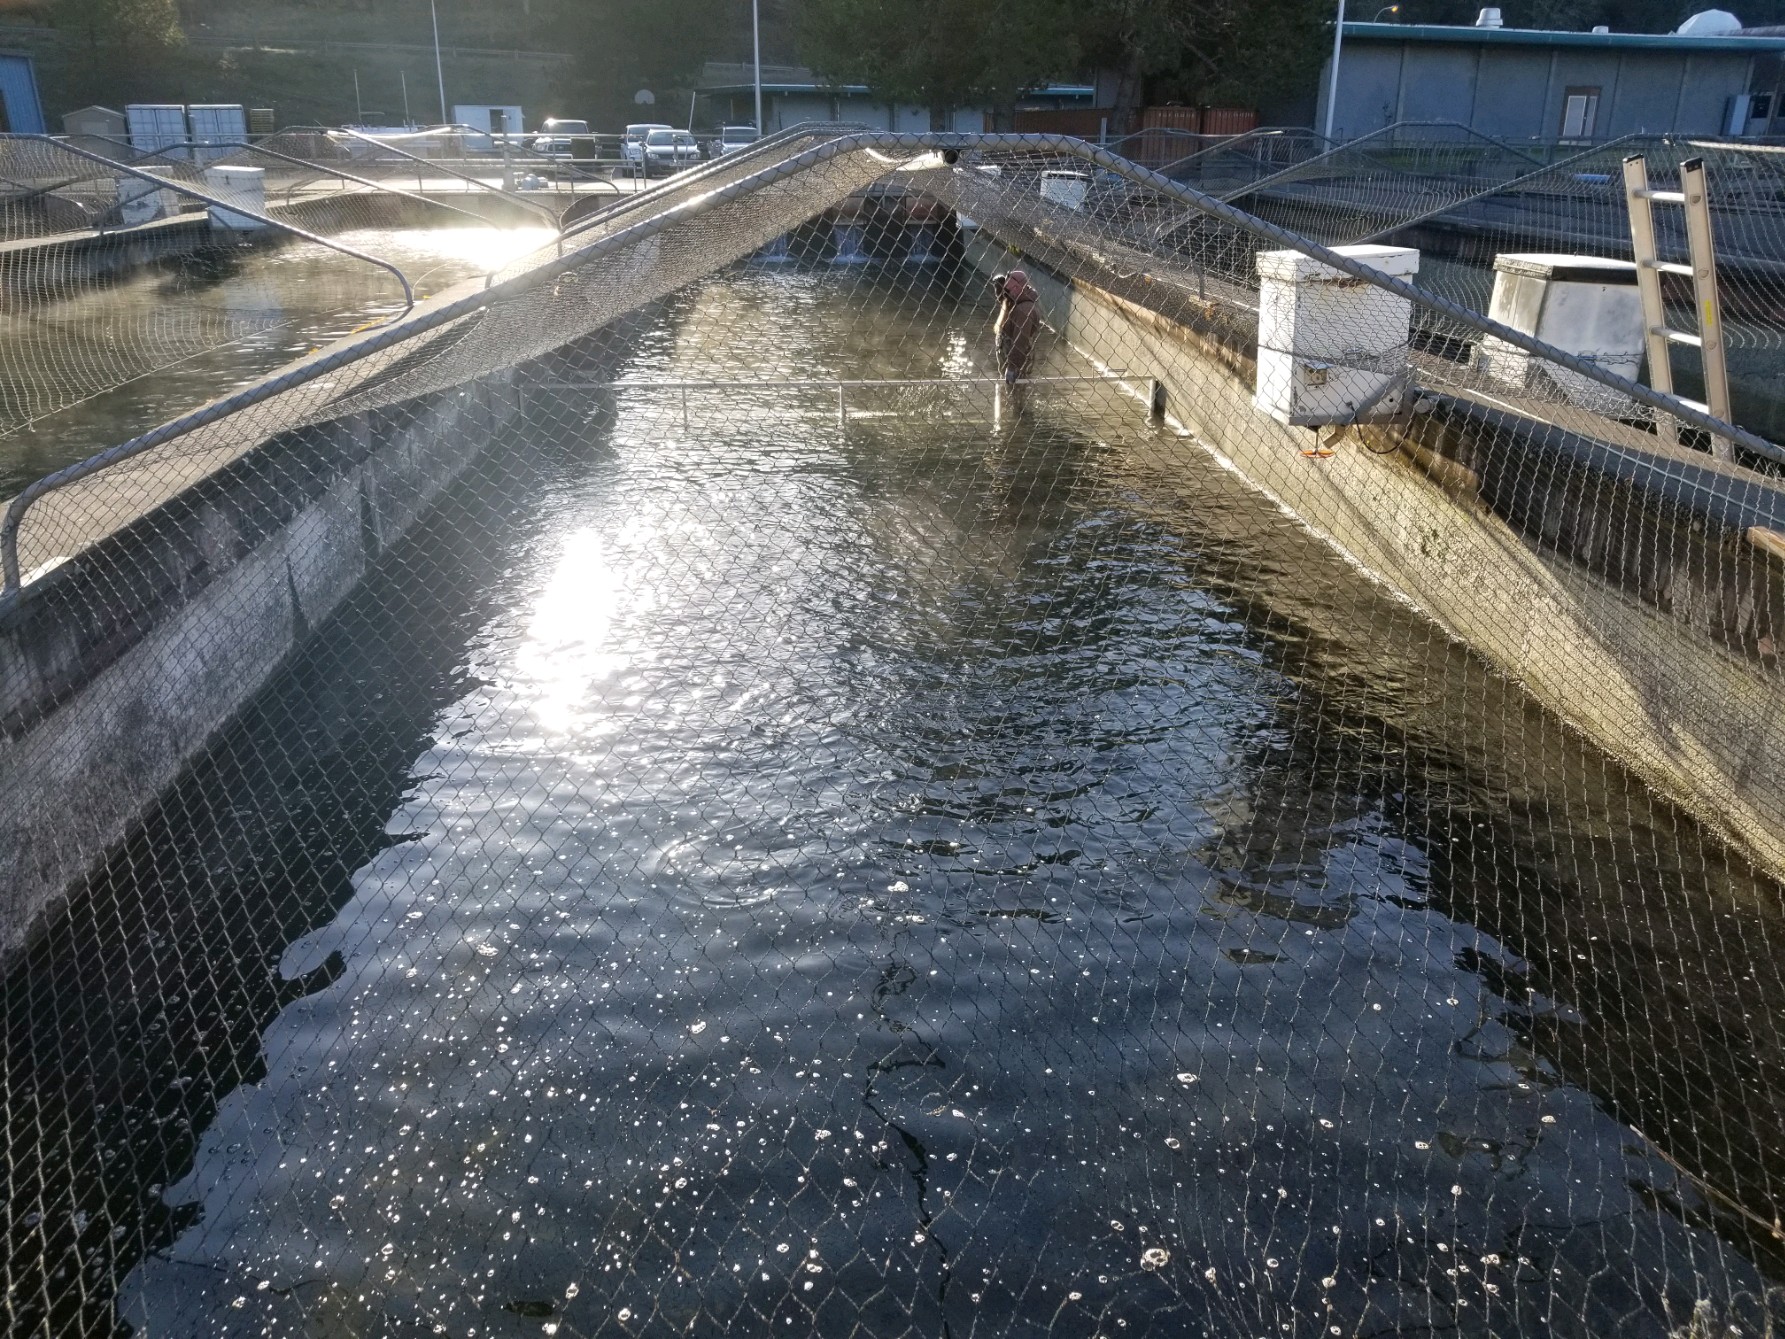 Fish hatchery power problems continue, likely impacting more brood years >  Portland District > Portland District News Releases